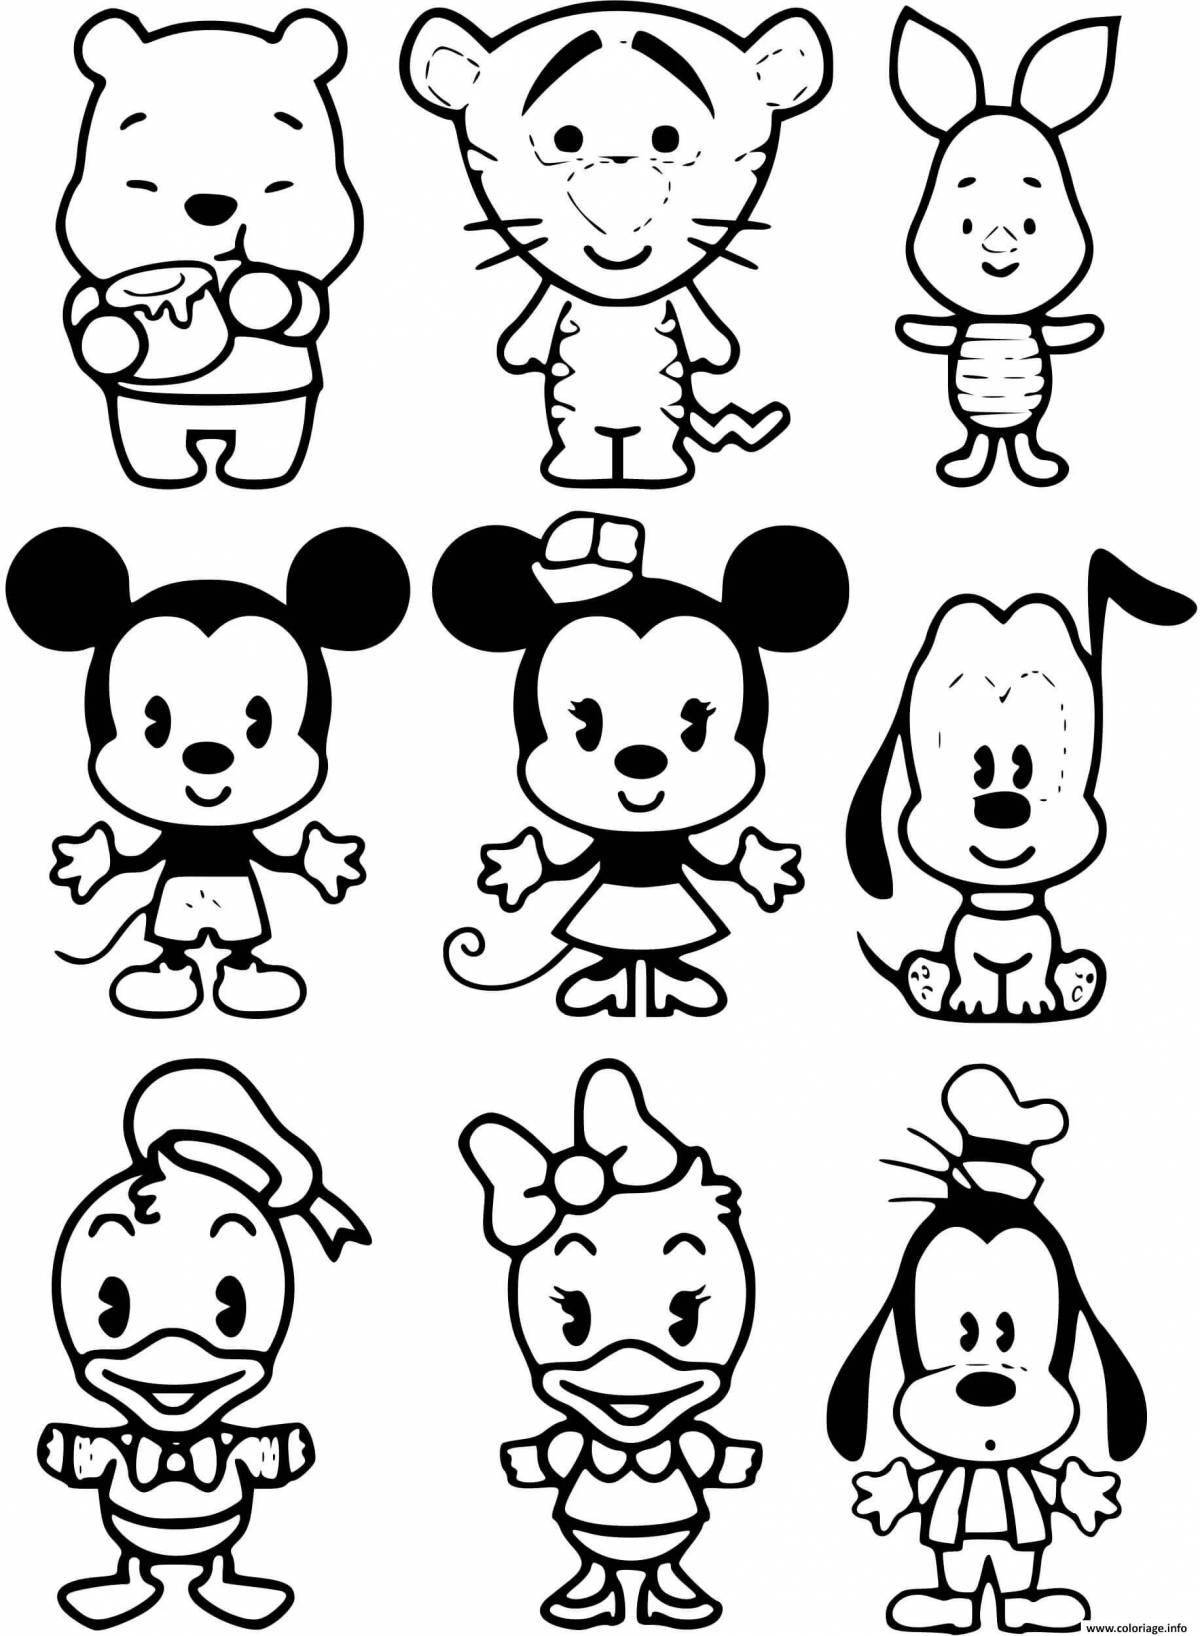 Mini stickers with fun coloring pages